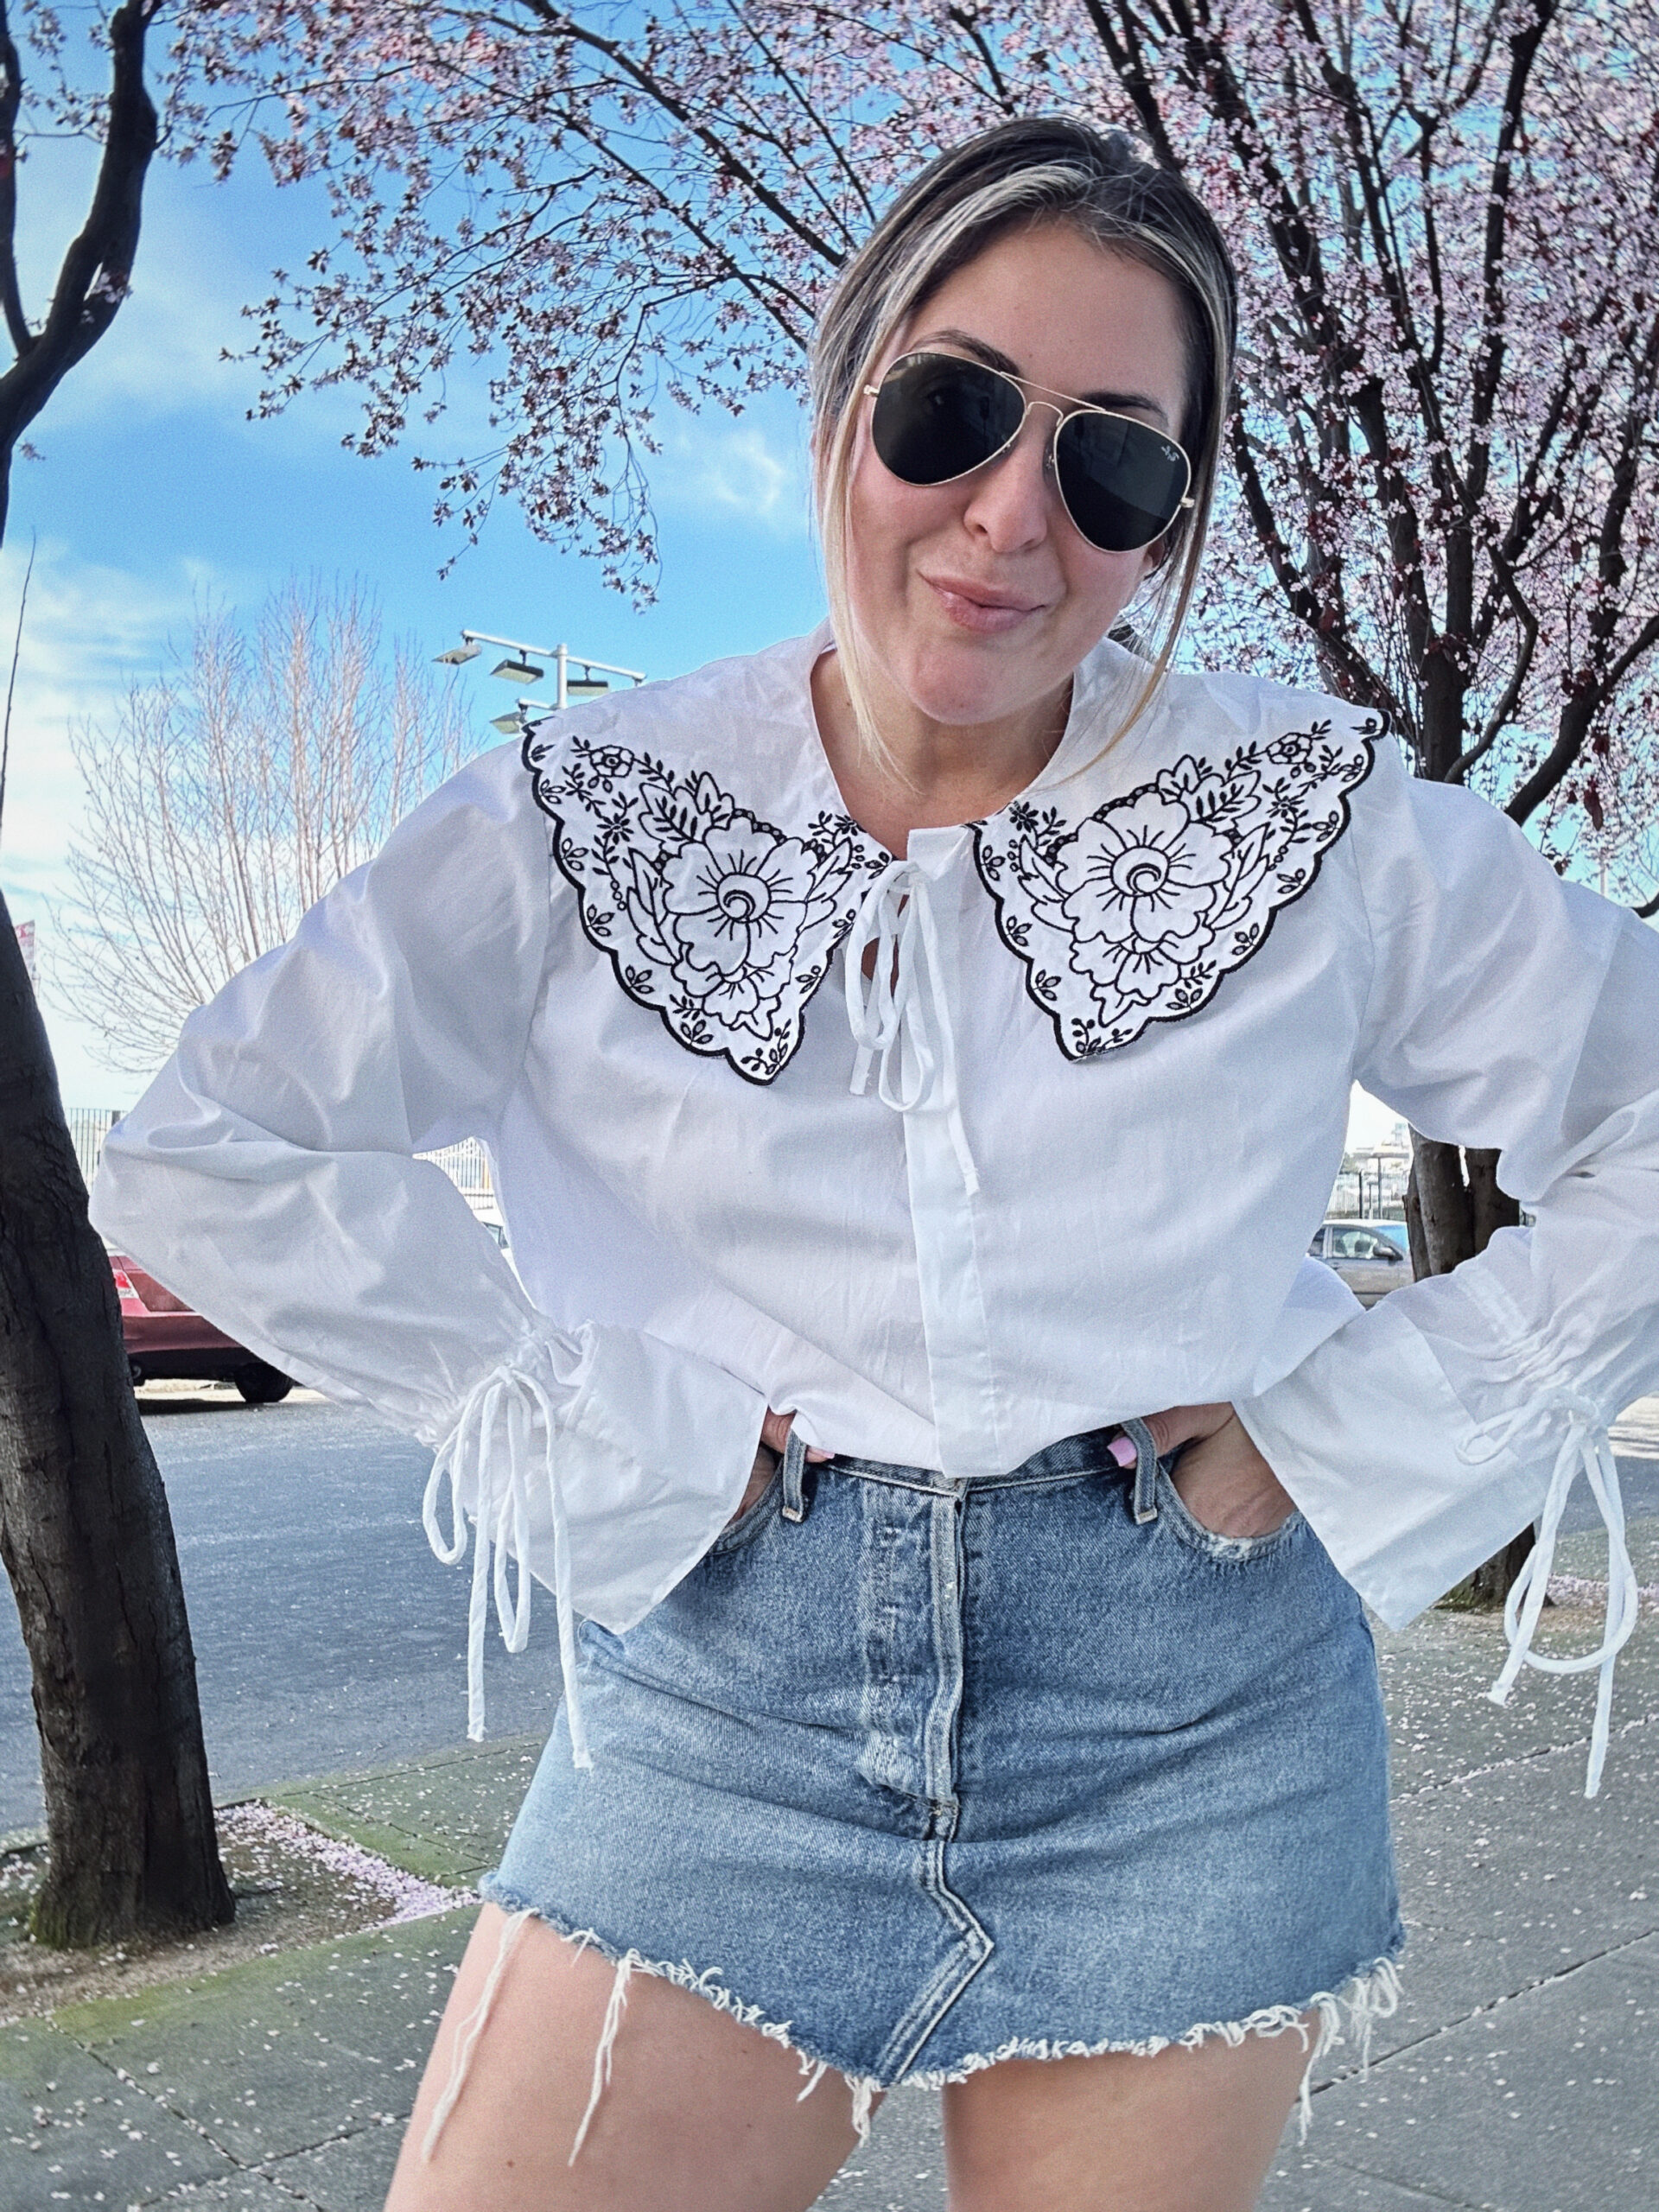 Poplin Blouse with Eyelet Embroidery, H&M, Viral Top
